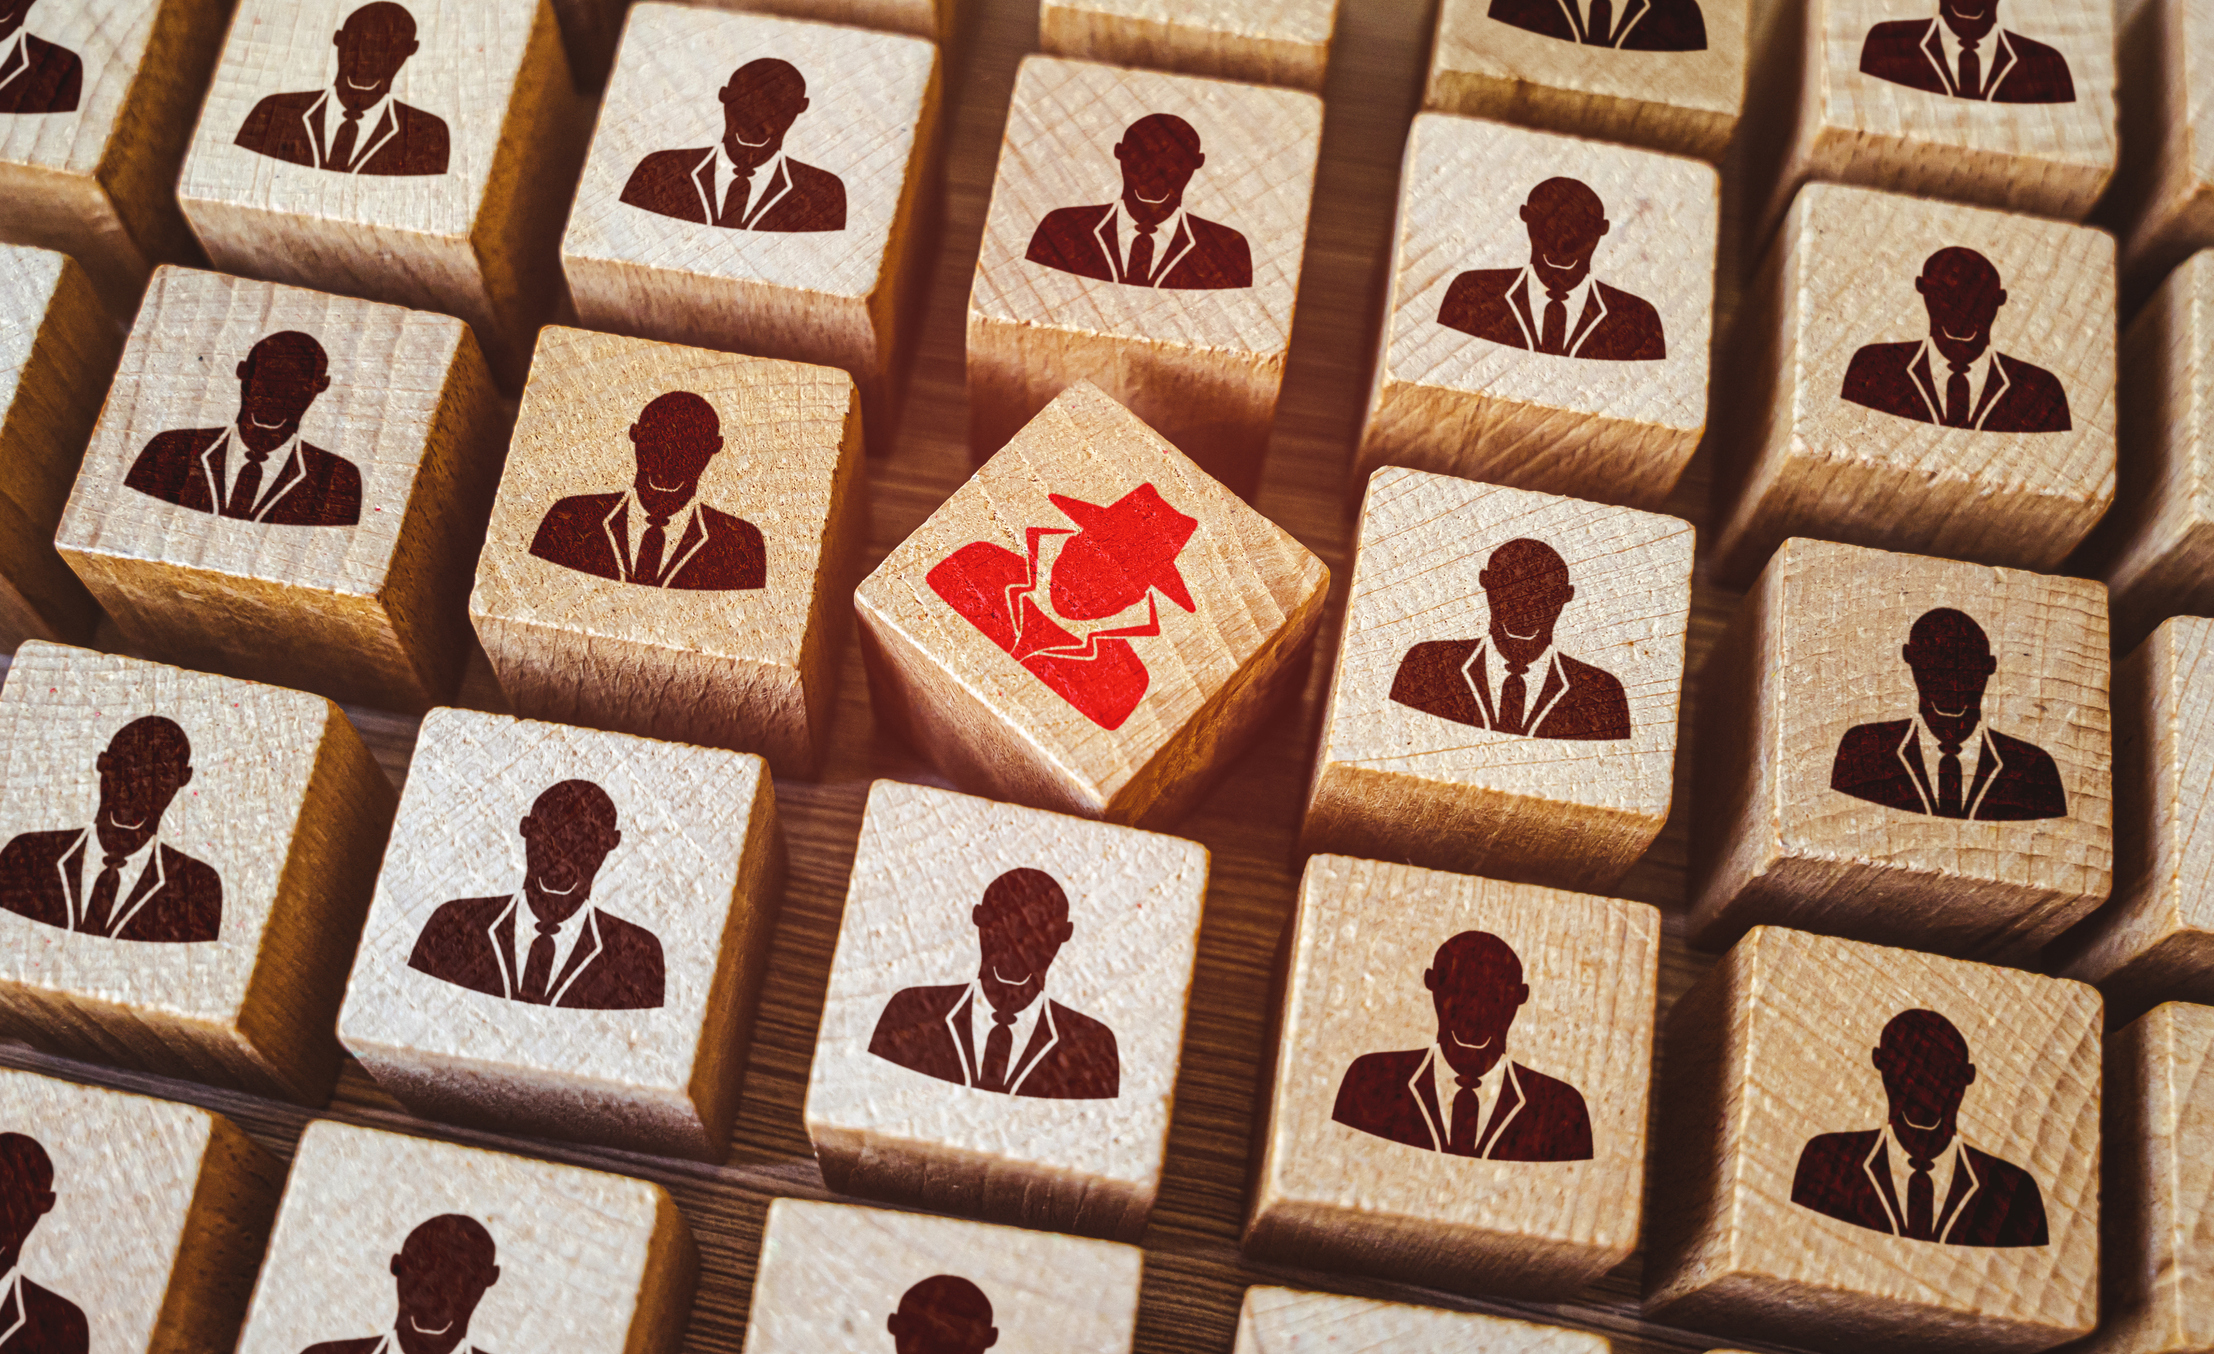 Tiles with black icons of people in a suit. The tile in the middle is tilted and has a red icon of someone in a trench coat and hat